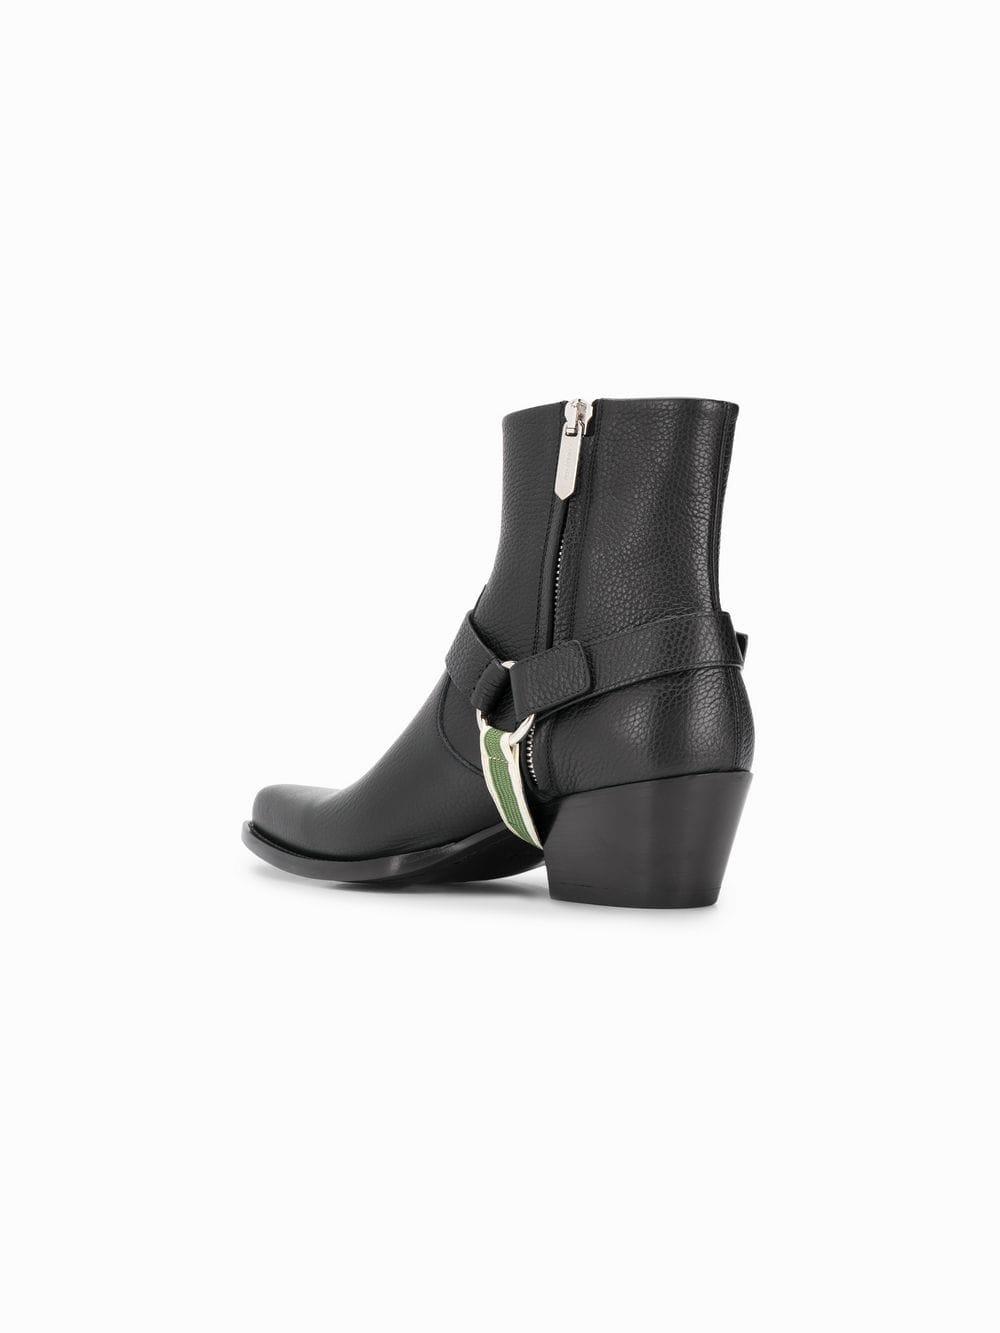 CALVIN KLEIN 205W39NYC Harness-strap Leather Ankle Boots in Black 